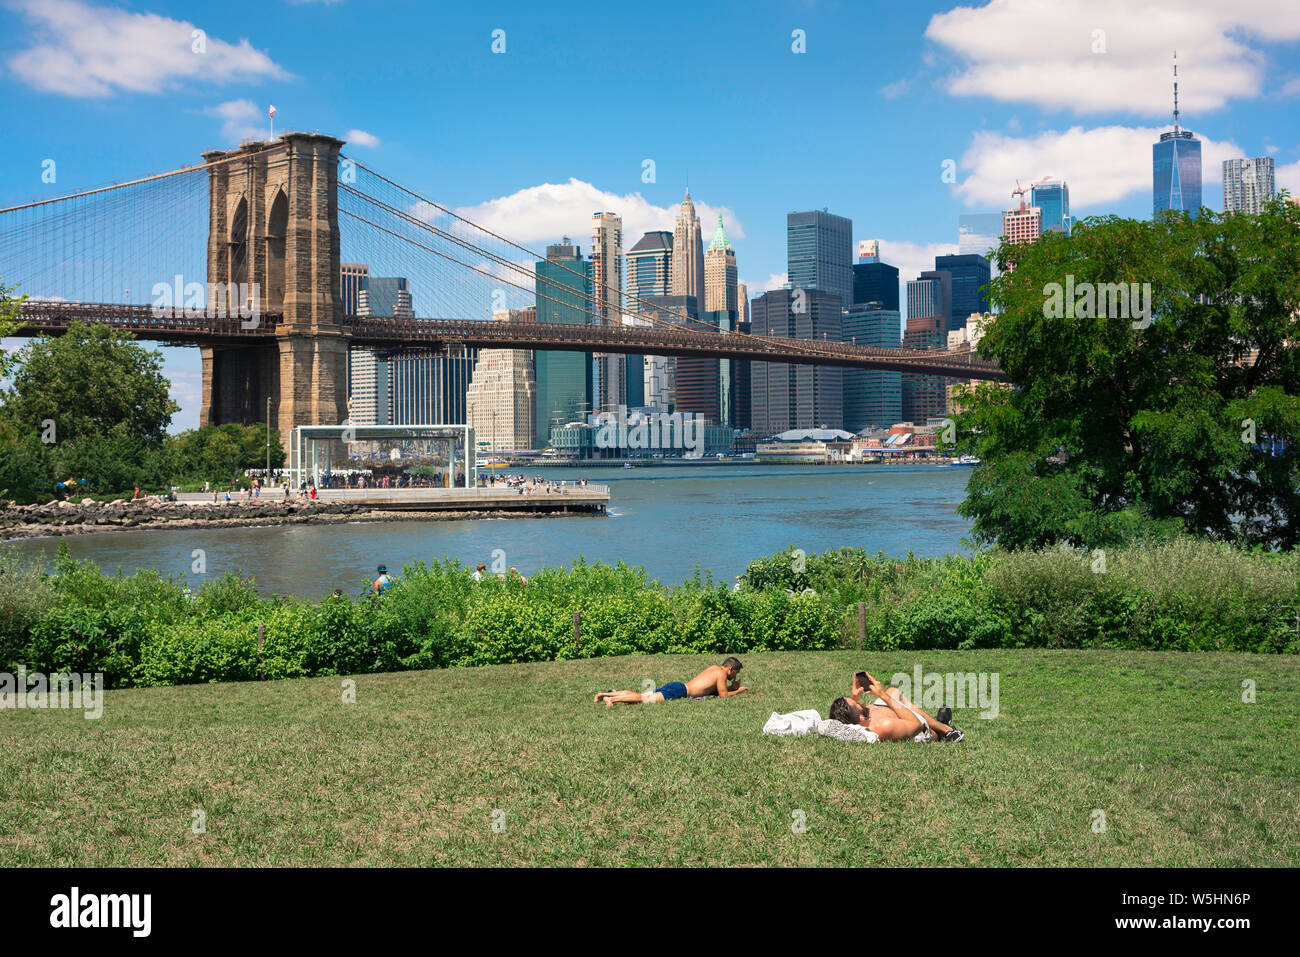 New York city summer, view of two men sunbathing in Main Street Park, Brooklyn, with the Brooklyn Bridge and Lower Manhattan skyline in the distance. Stock Photo